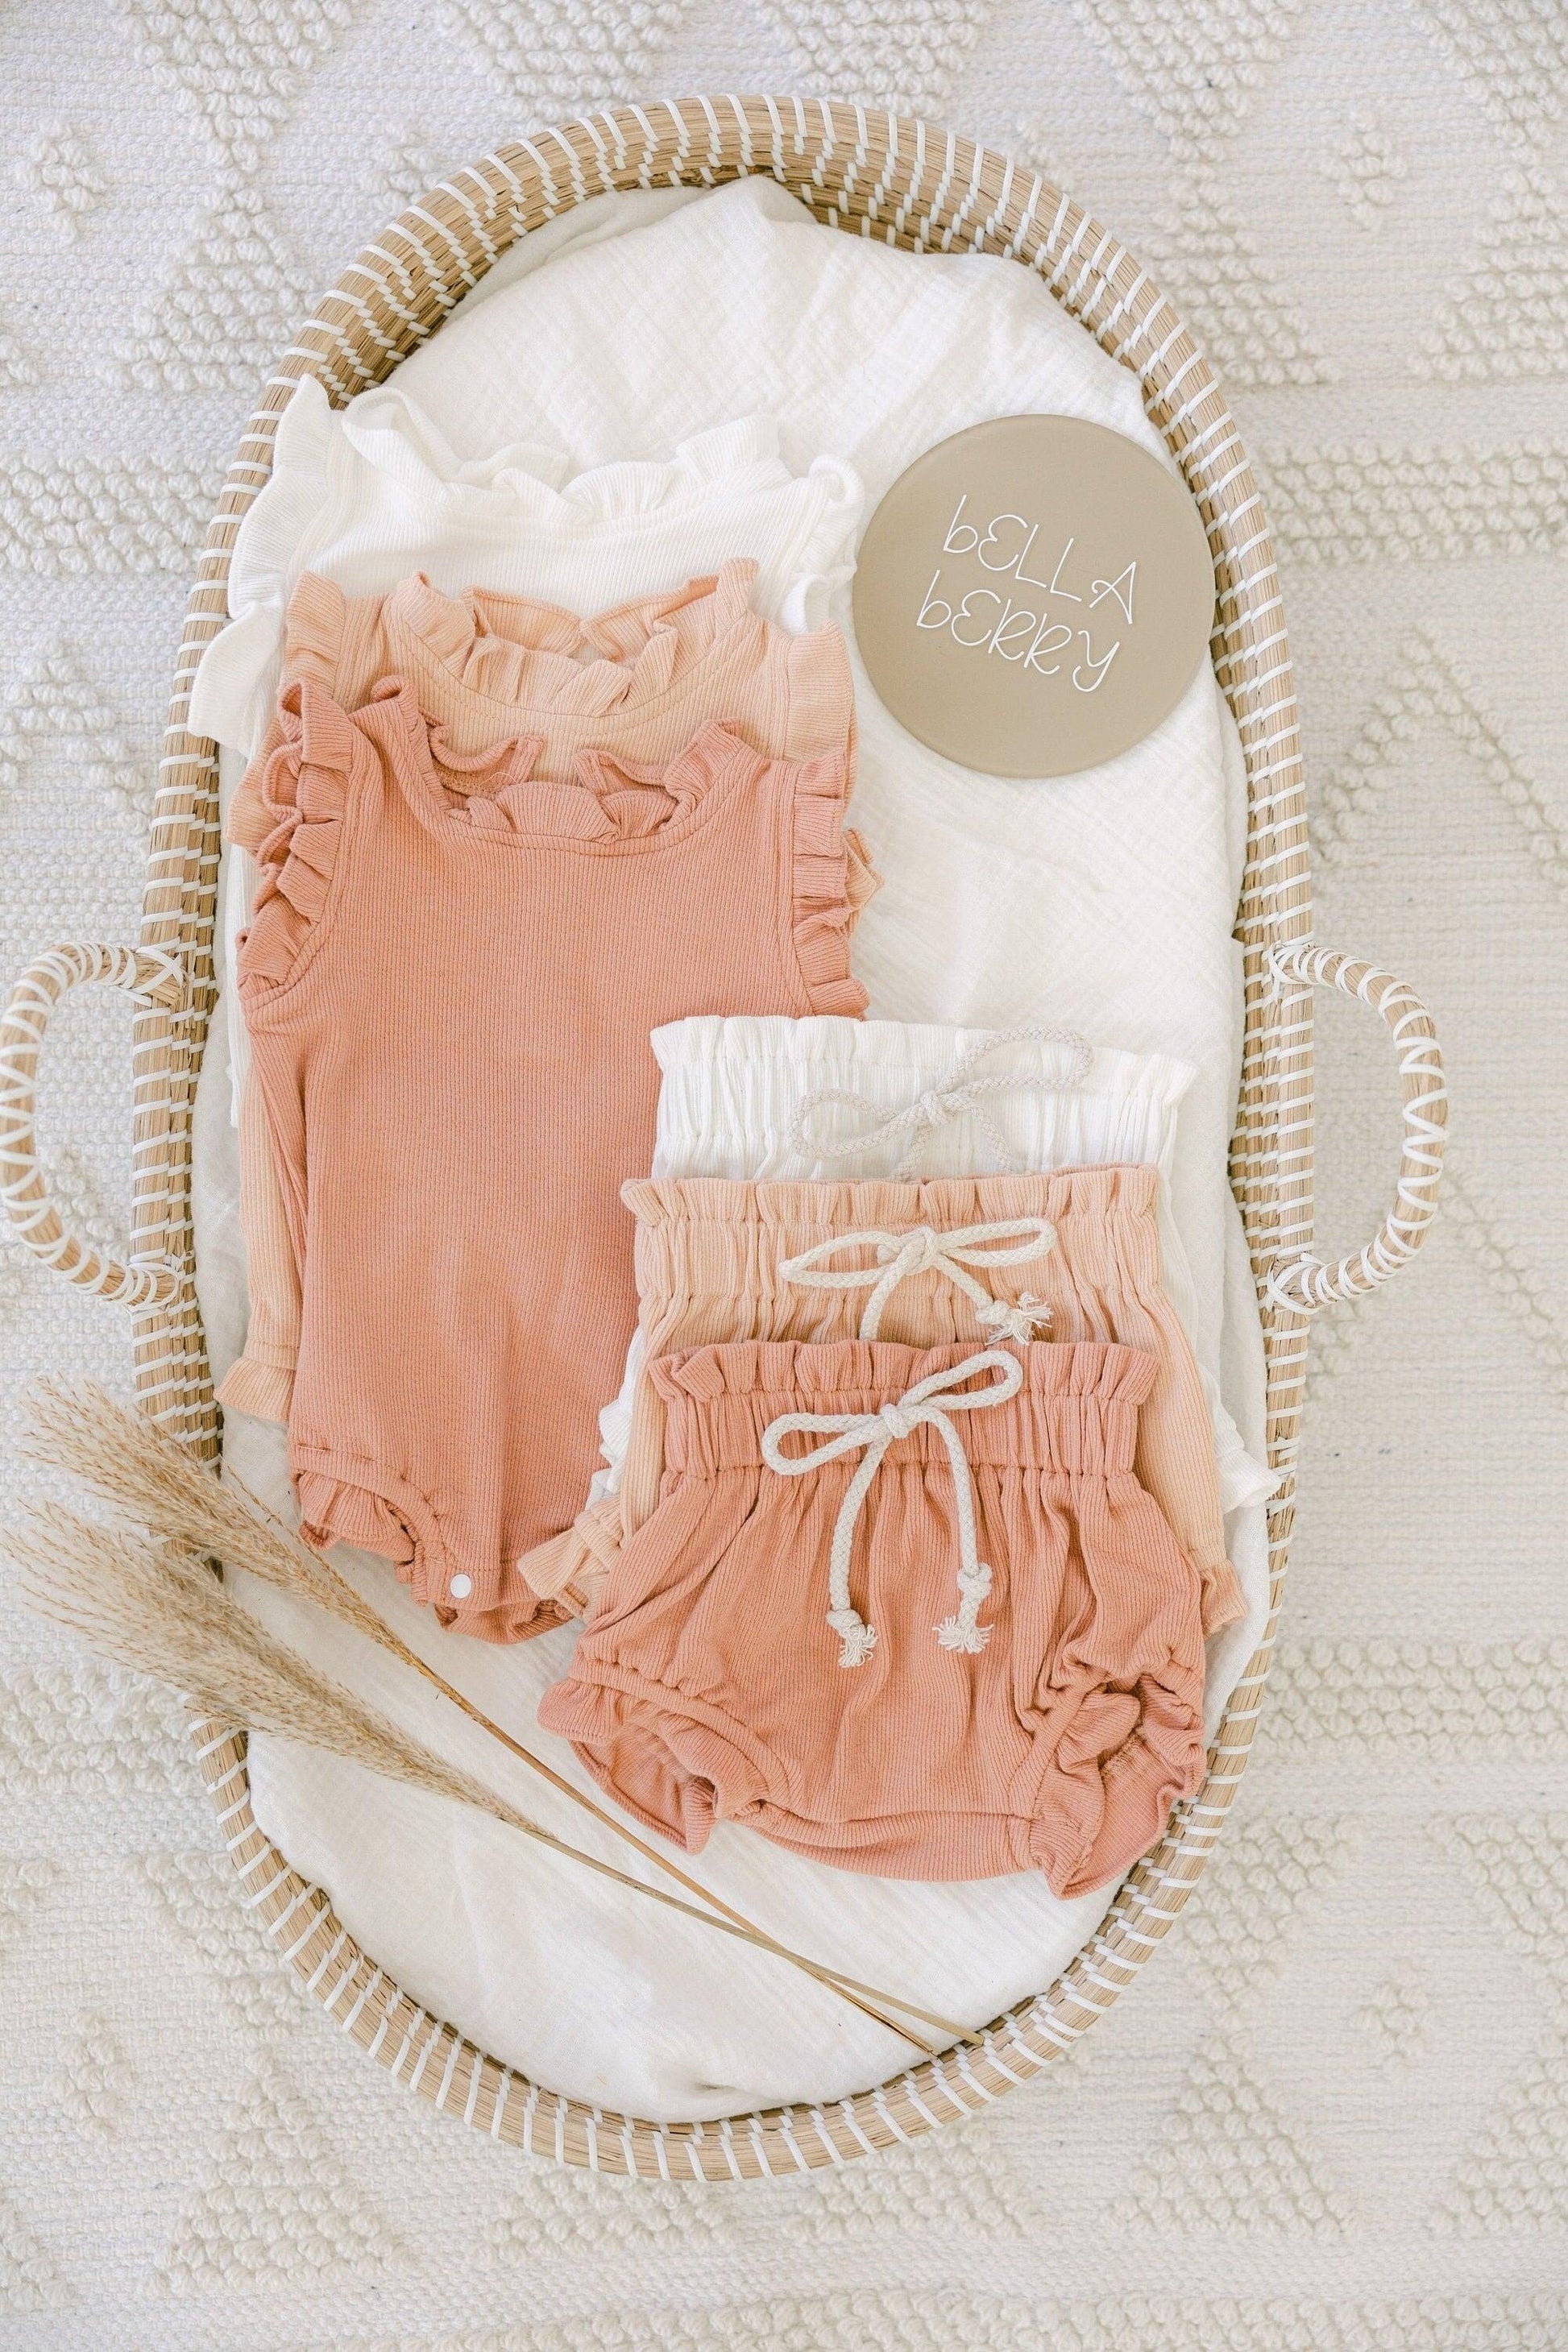 Baby Girl Ruffle Romper and Shorts - BellaBerryDesign